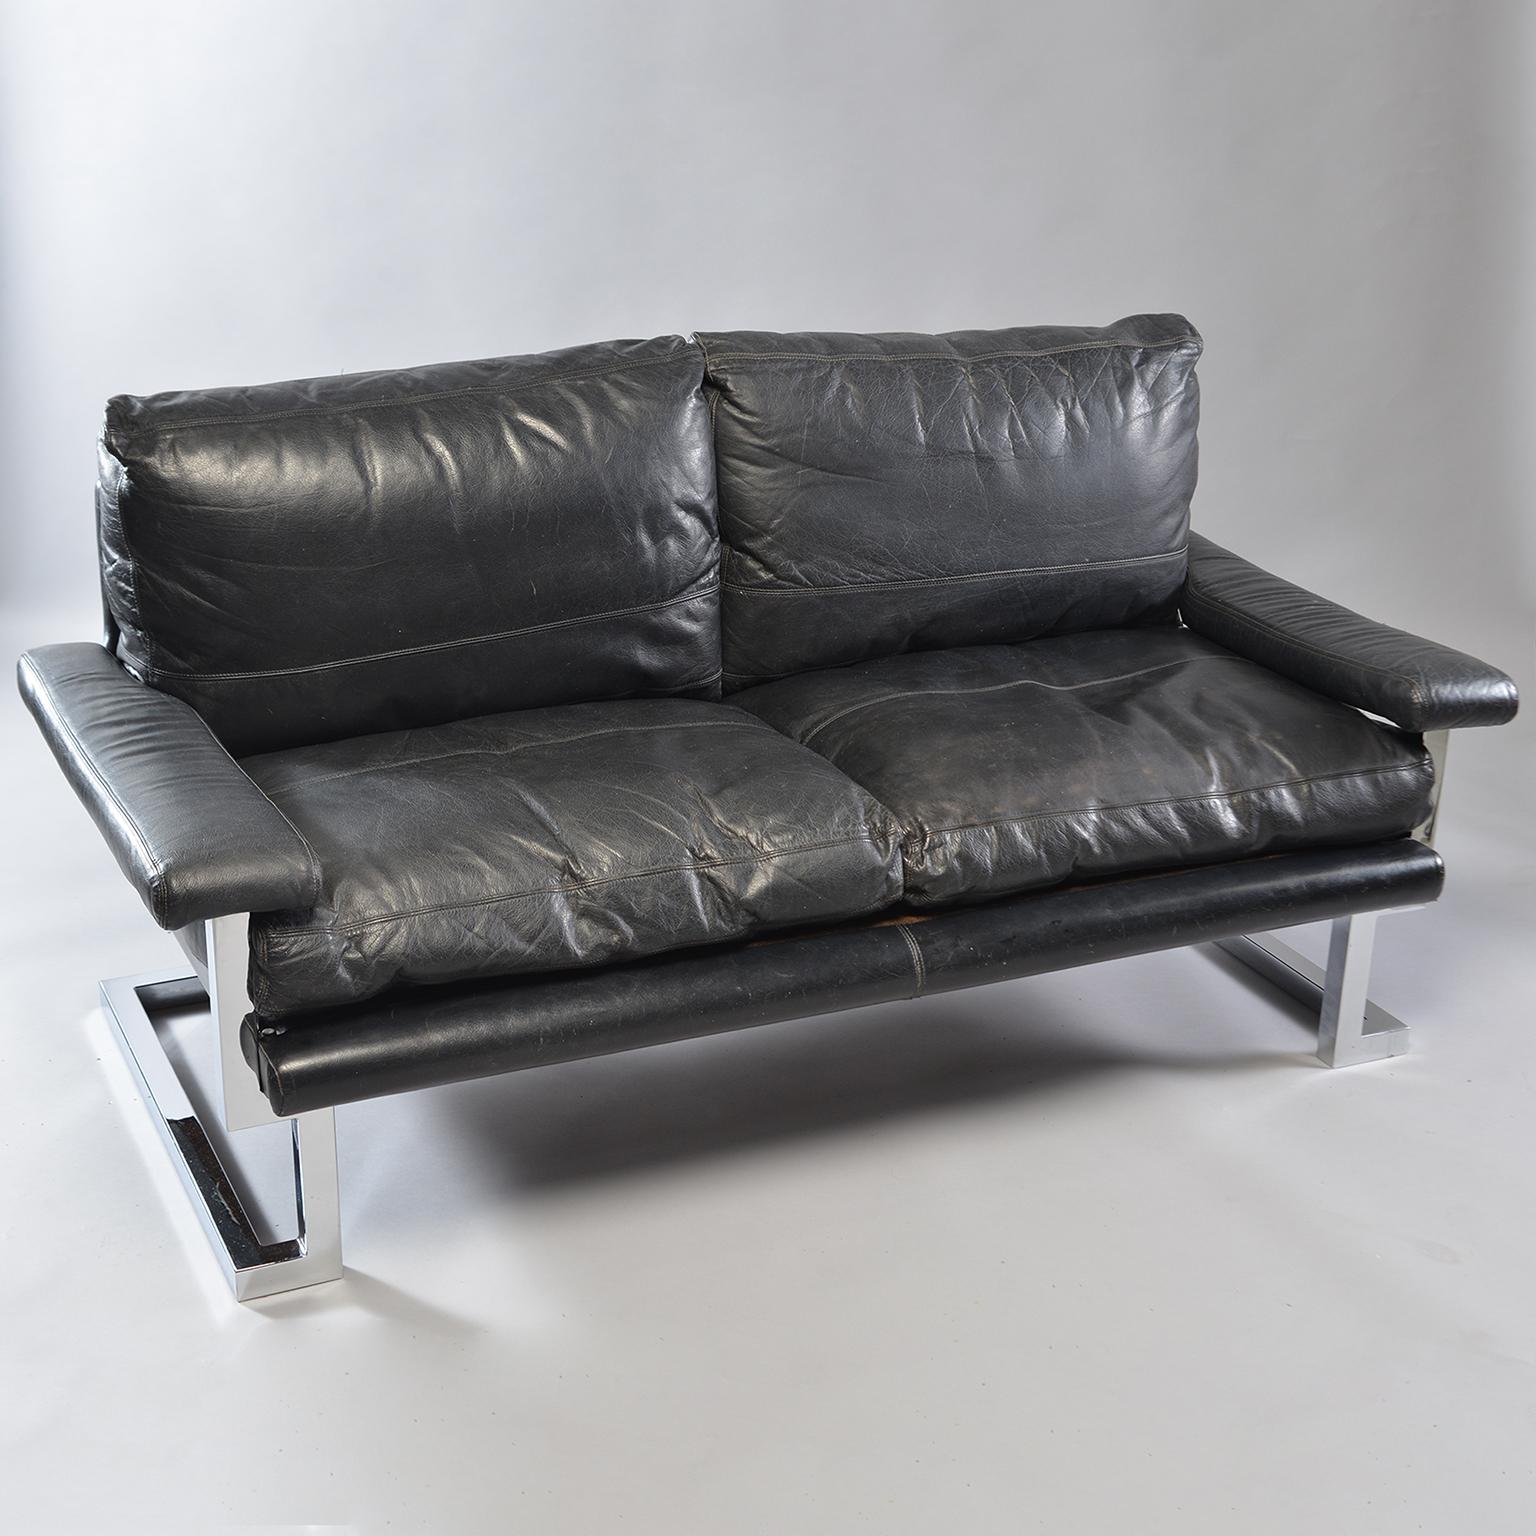 Black leather and chrome sofa designed by Tim Bates for the Mandarin Collection of UK furniture maker Pieff & Co, circa 1970s. Comfortable with classic midcentury lines and style. Padded arm rests, pebble finished leather and chromed steel frame.